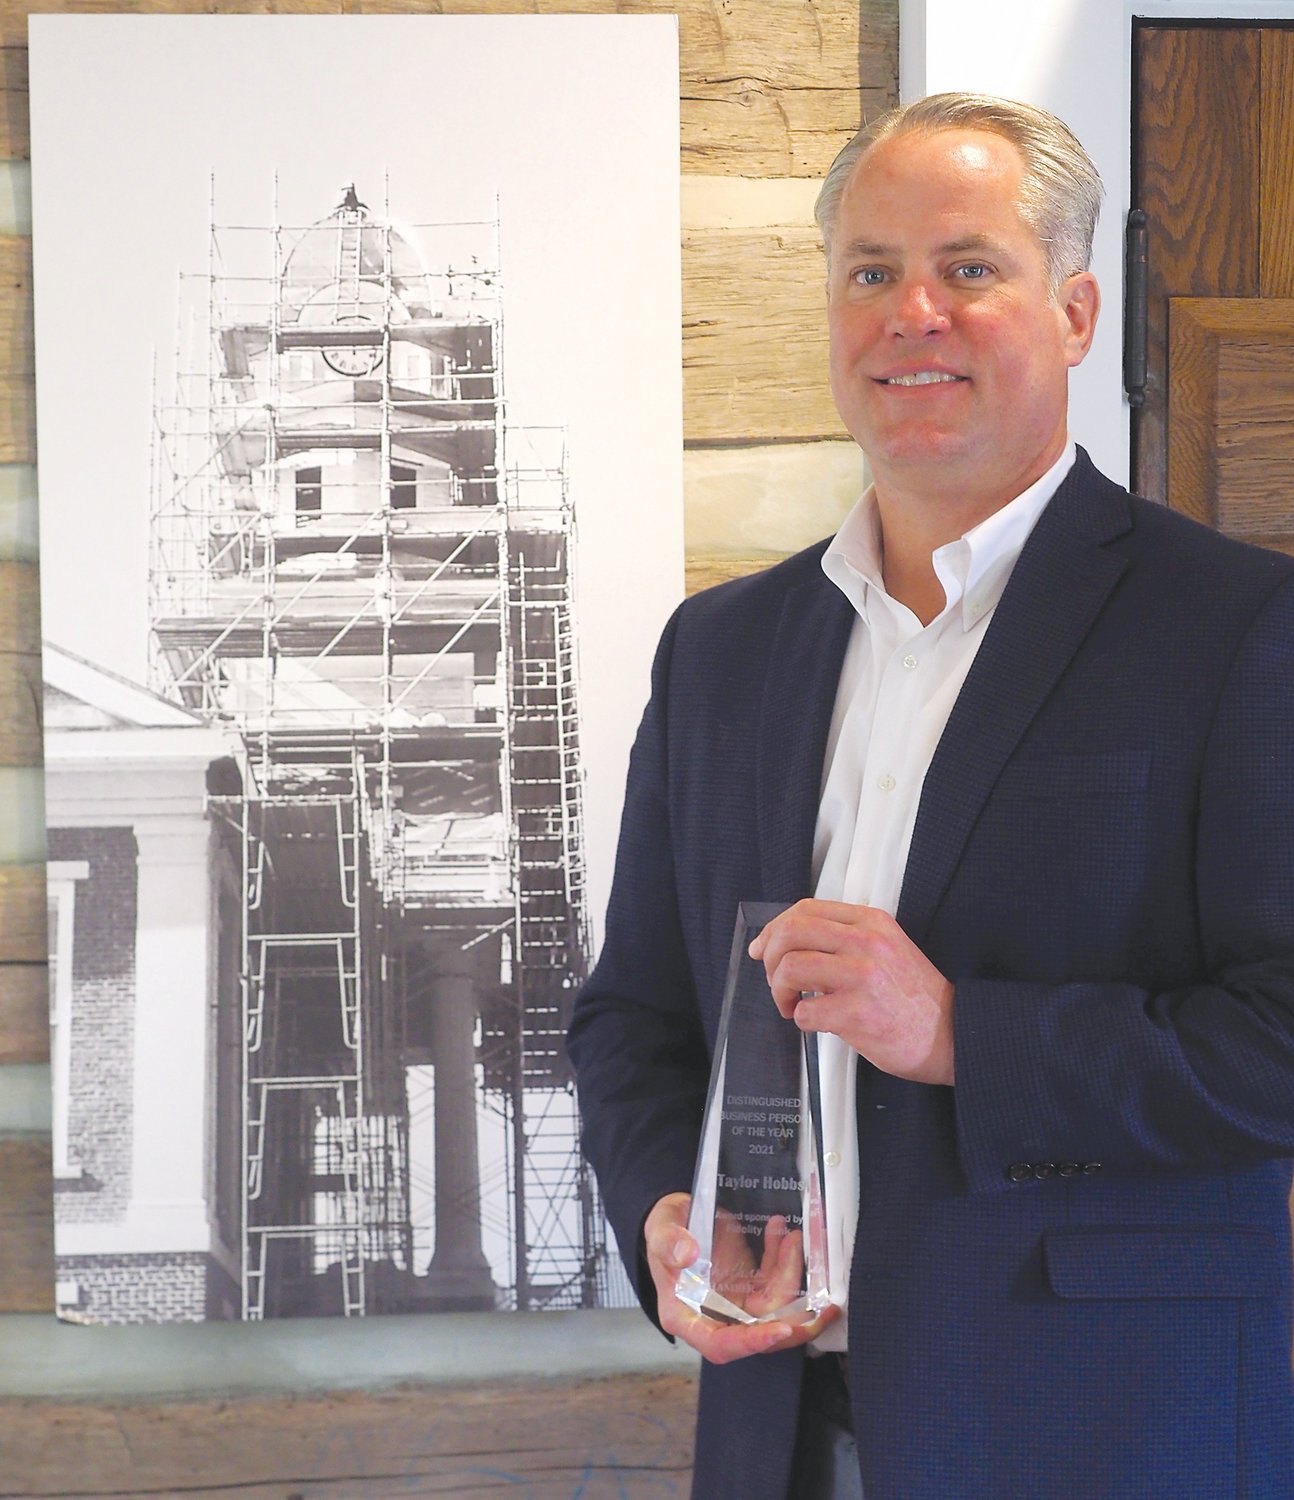 Hobbs poses with his recent award from the Chatham Chamber in front of a photo of the county's historic courthouse during its reconstruction.